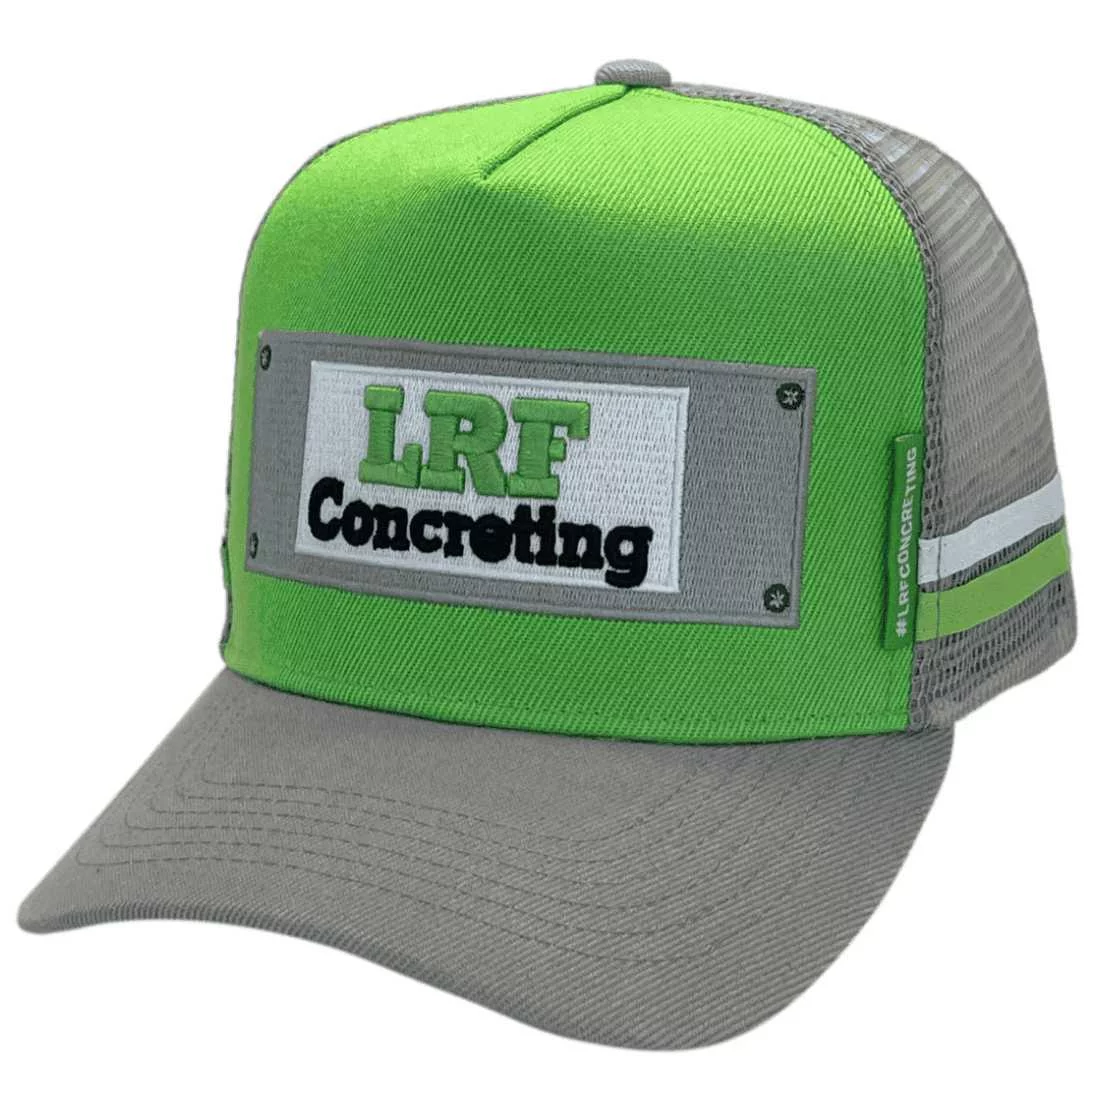 LRF Concreting Oberon NSW HP Original Midrange Aussie Trucker Hat with Australian Head Fit Crown and 2 Sidebands Lime Grey White